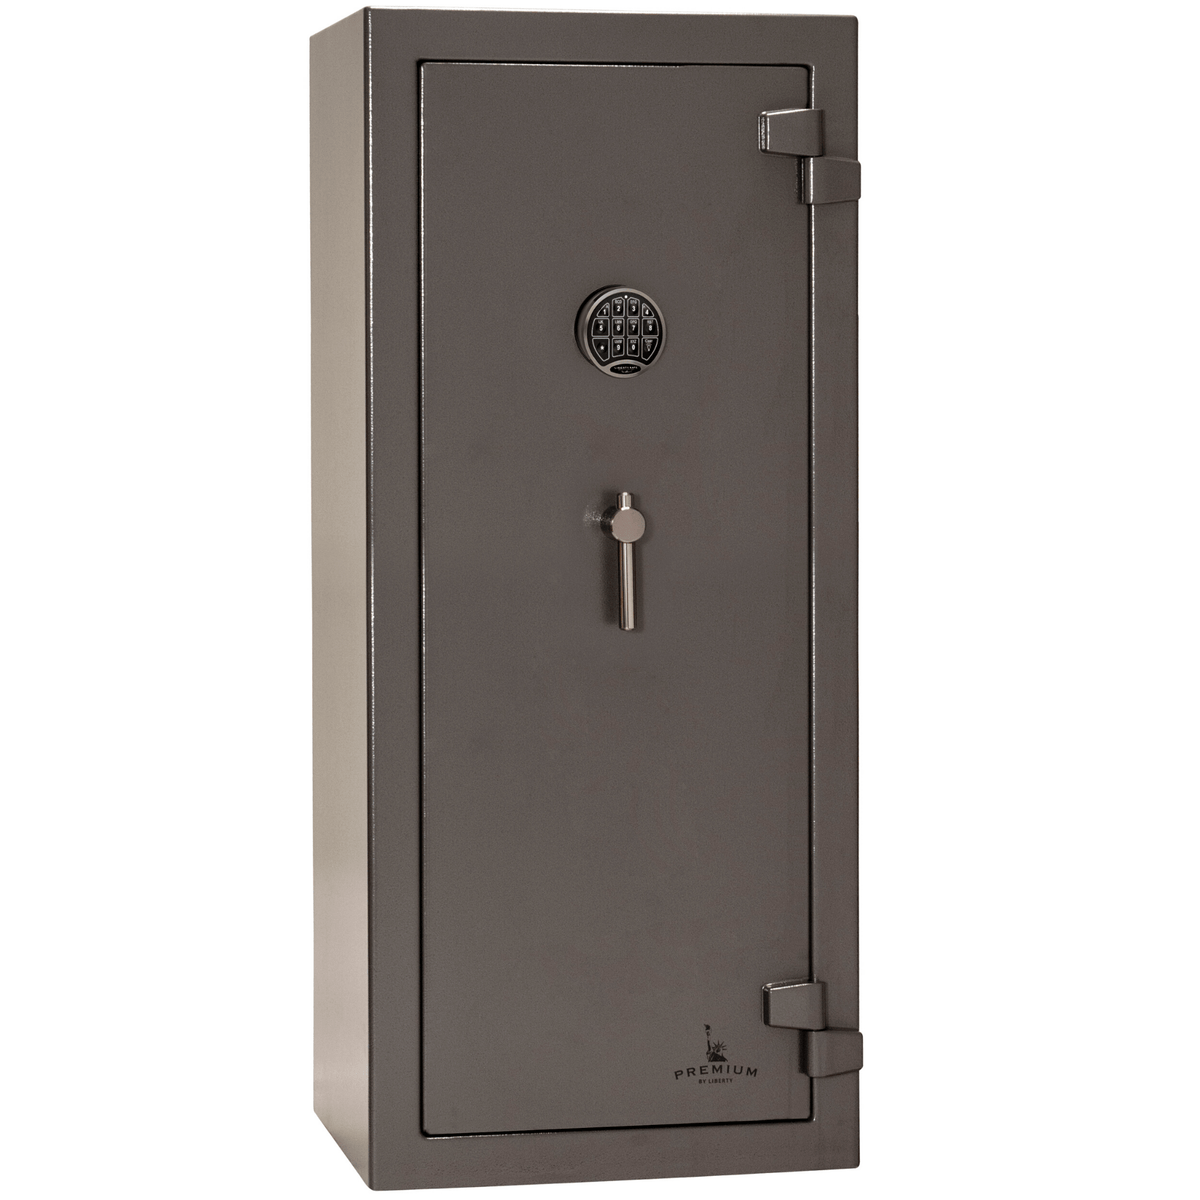 Premium Home | 17 | 90 Minute Fire Protection | Gray | Electronic Lock | Dimensions: 59&quot;(H) x 24&quot;(W) x 22.5&quot;(D) | Liberty Safe Norcal.